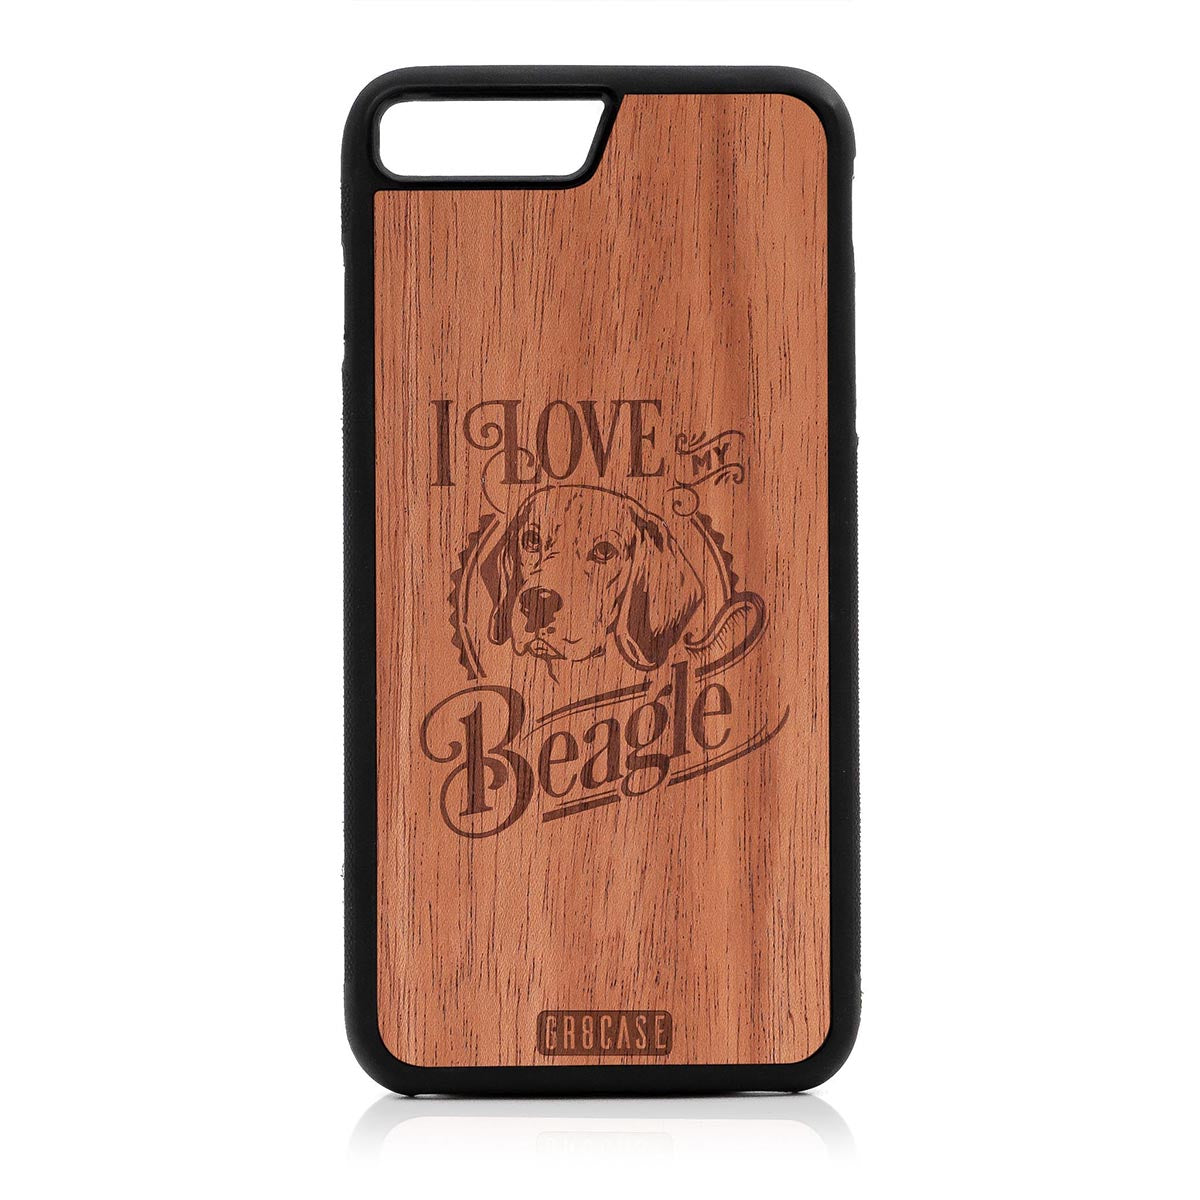 I Love My Beagle Design Wood Case For iPhone 7 Plus /8 Plus by GR8CASE